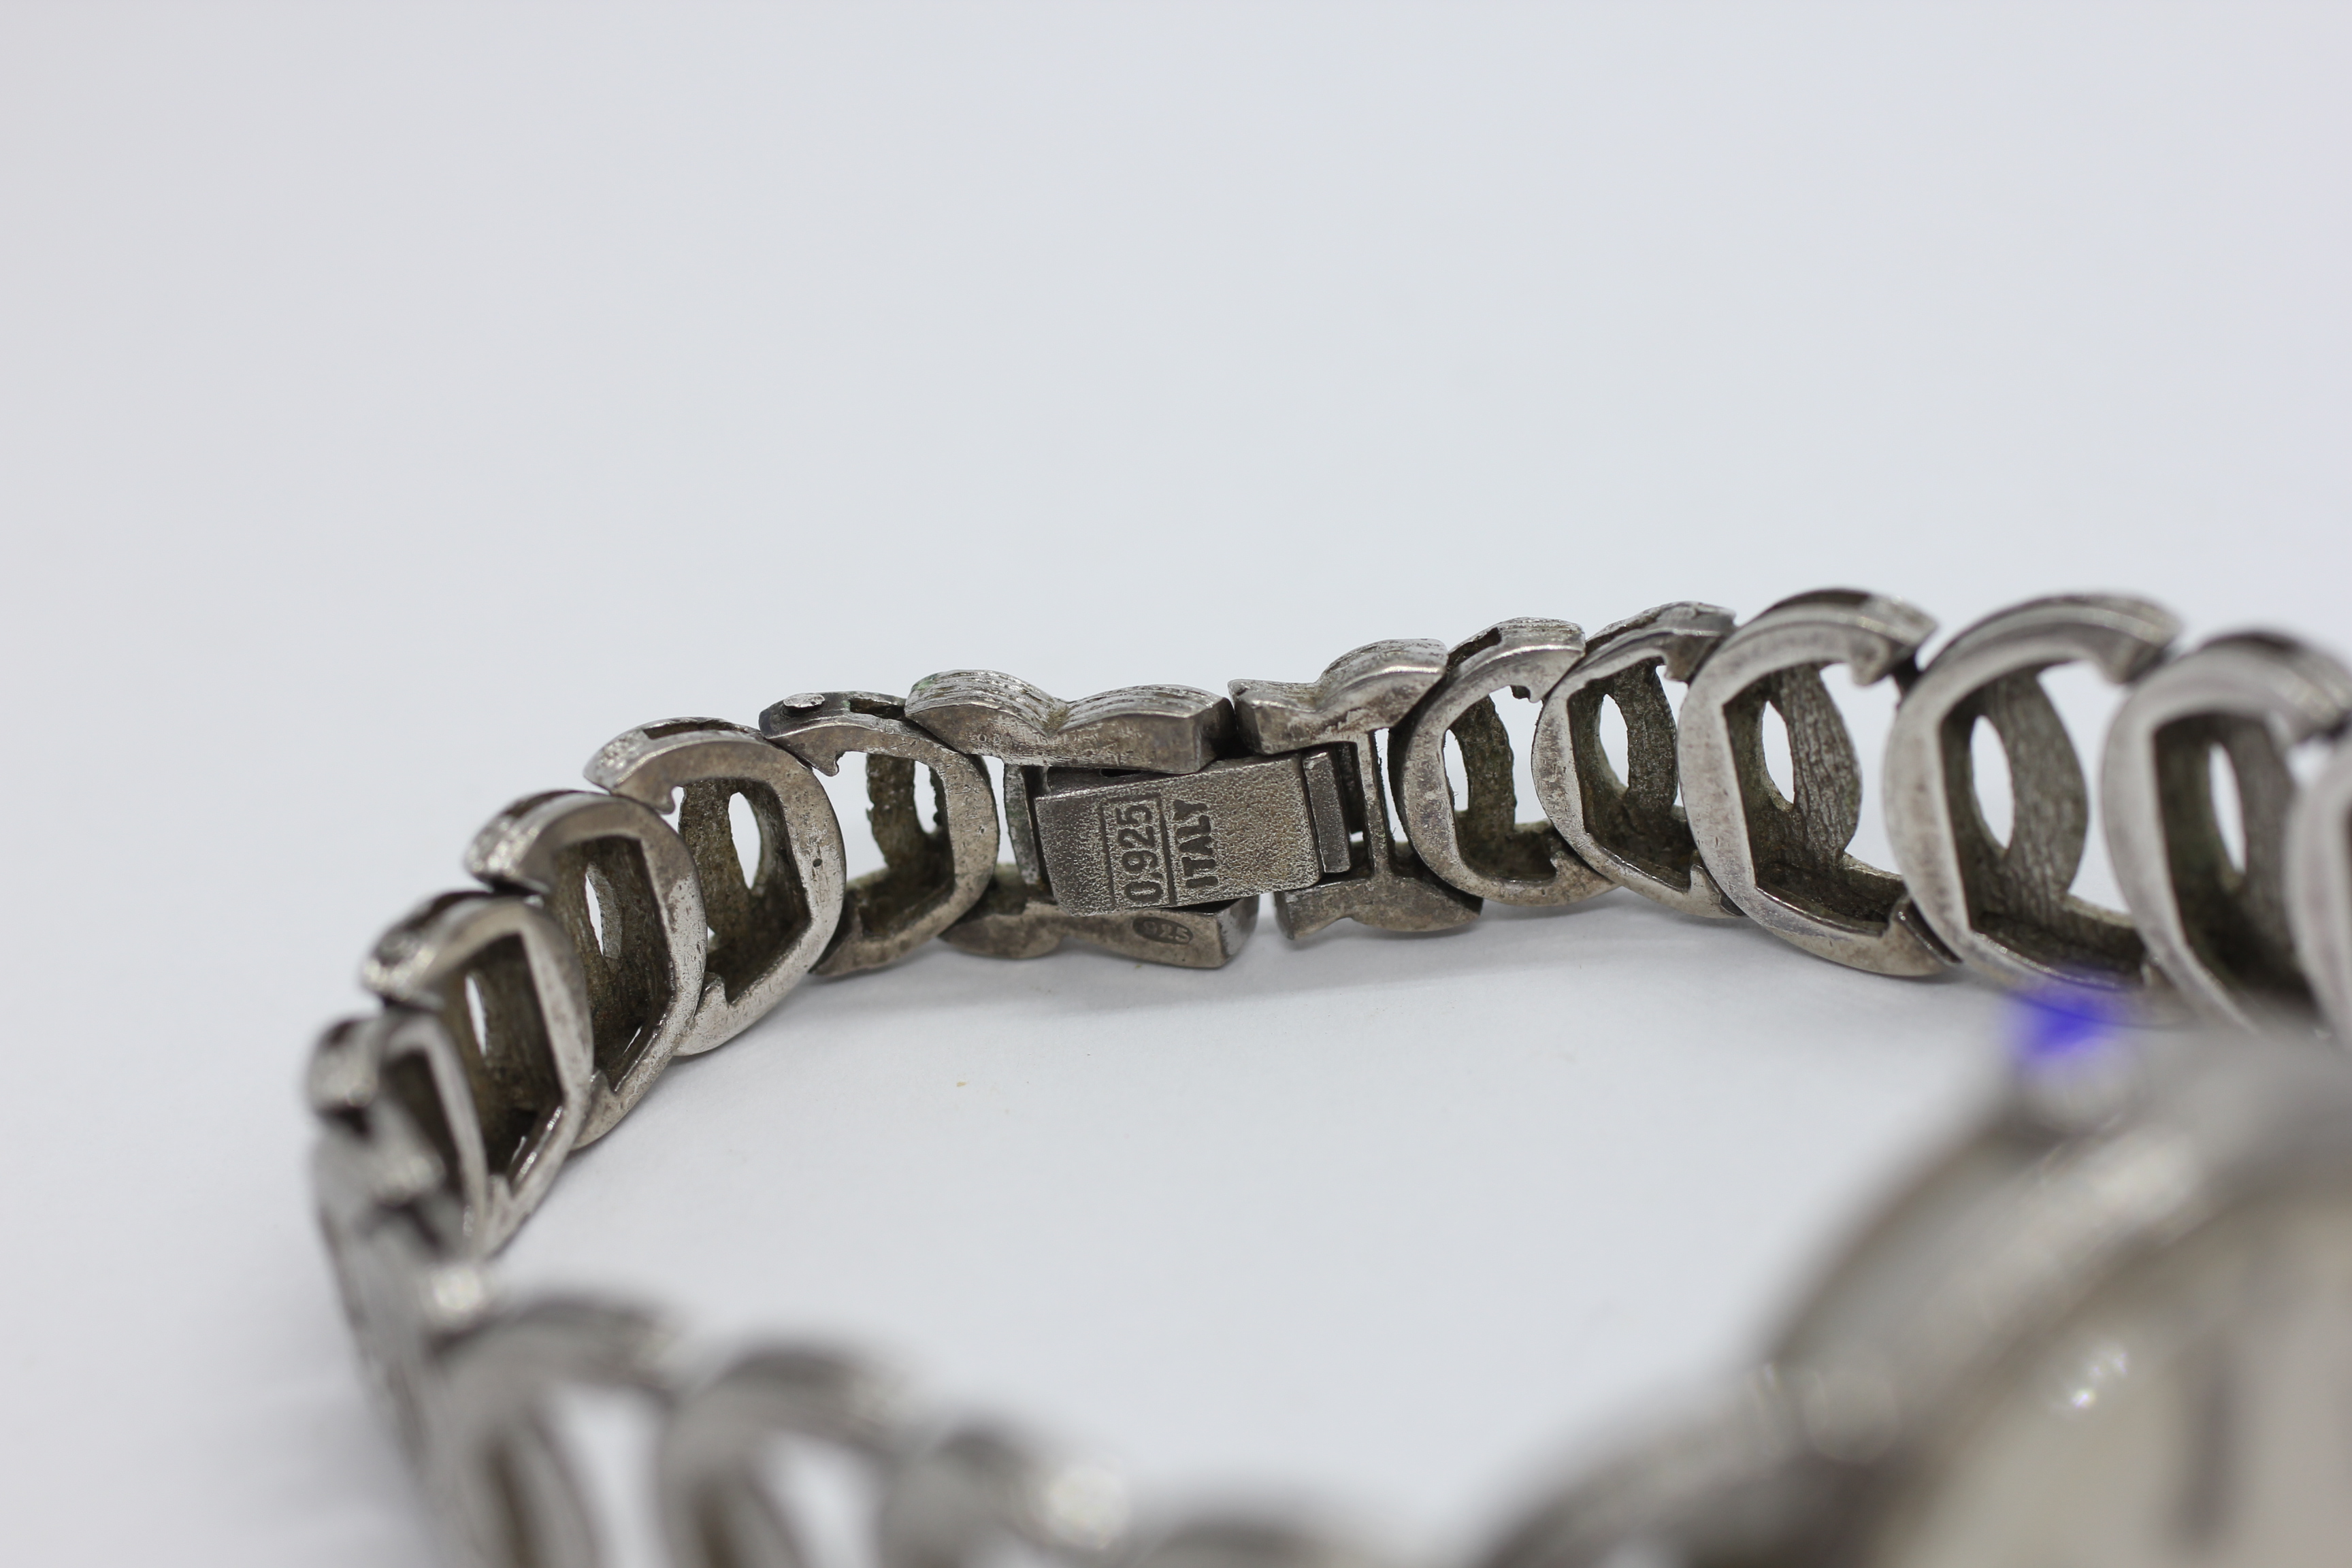 A LADIES SILVER ROTARY WRIST WATCH ON LINKED BRACELET. - Image 9 of 9